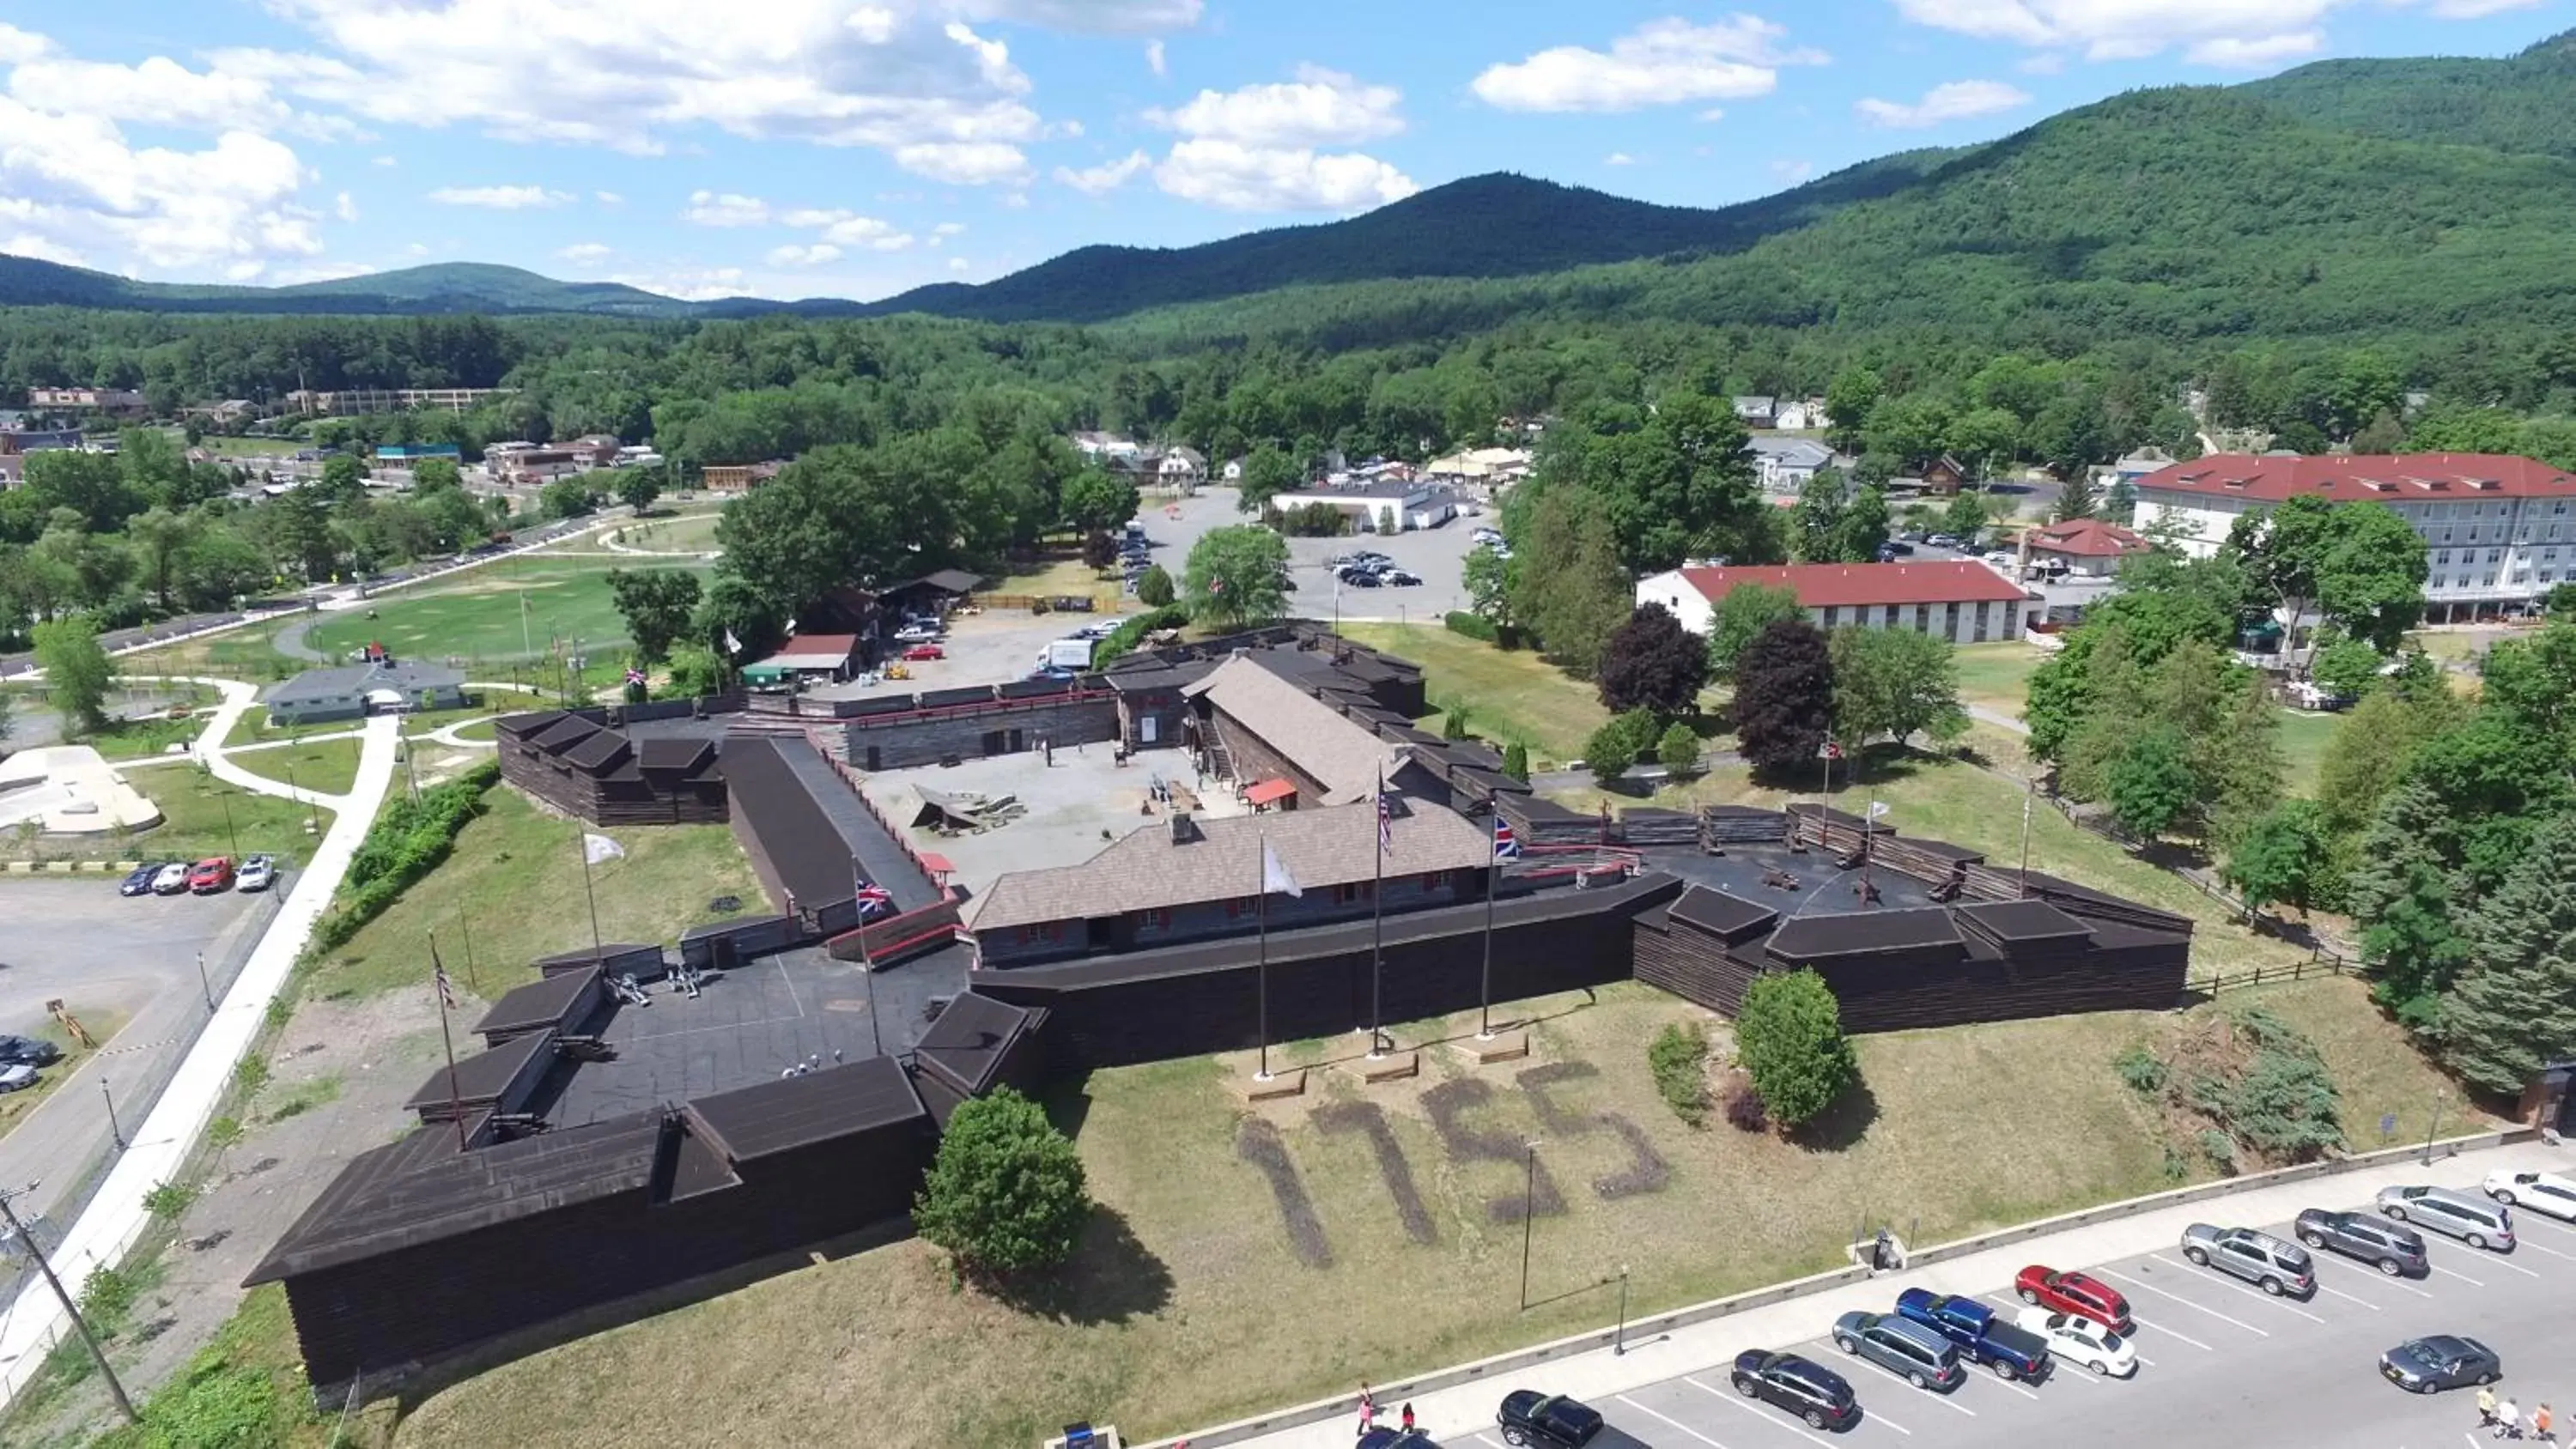 Entertainment, Bird's-eye View in Fort William Henry Hotel